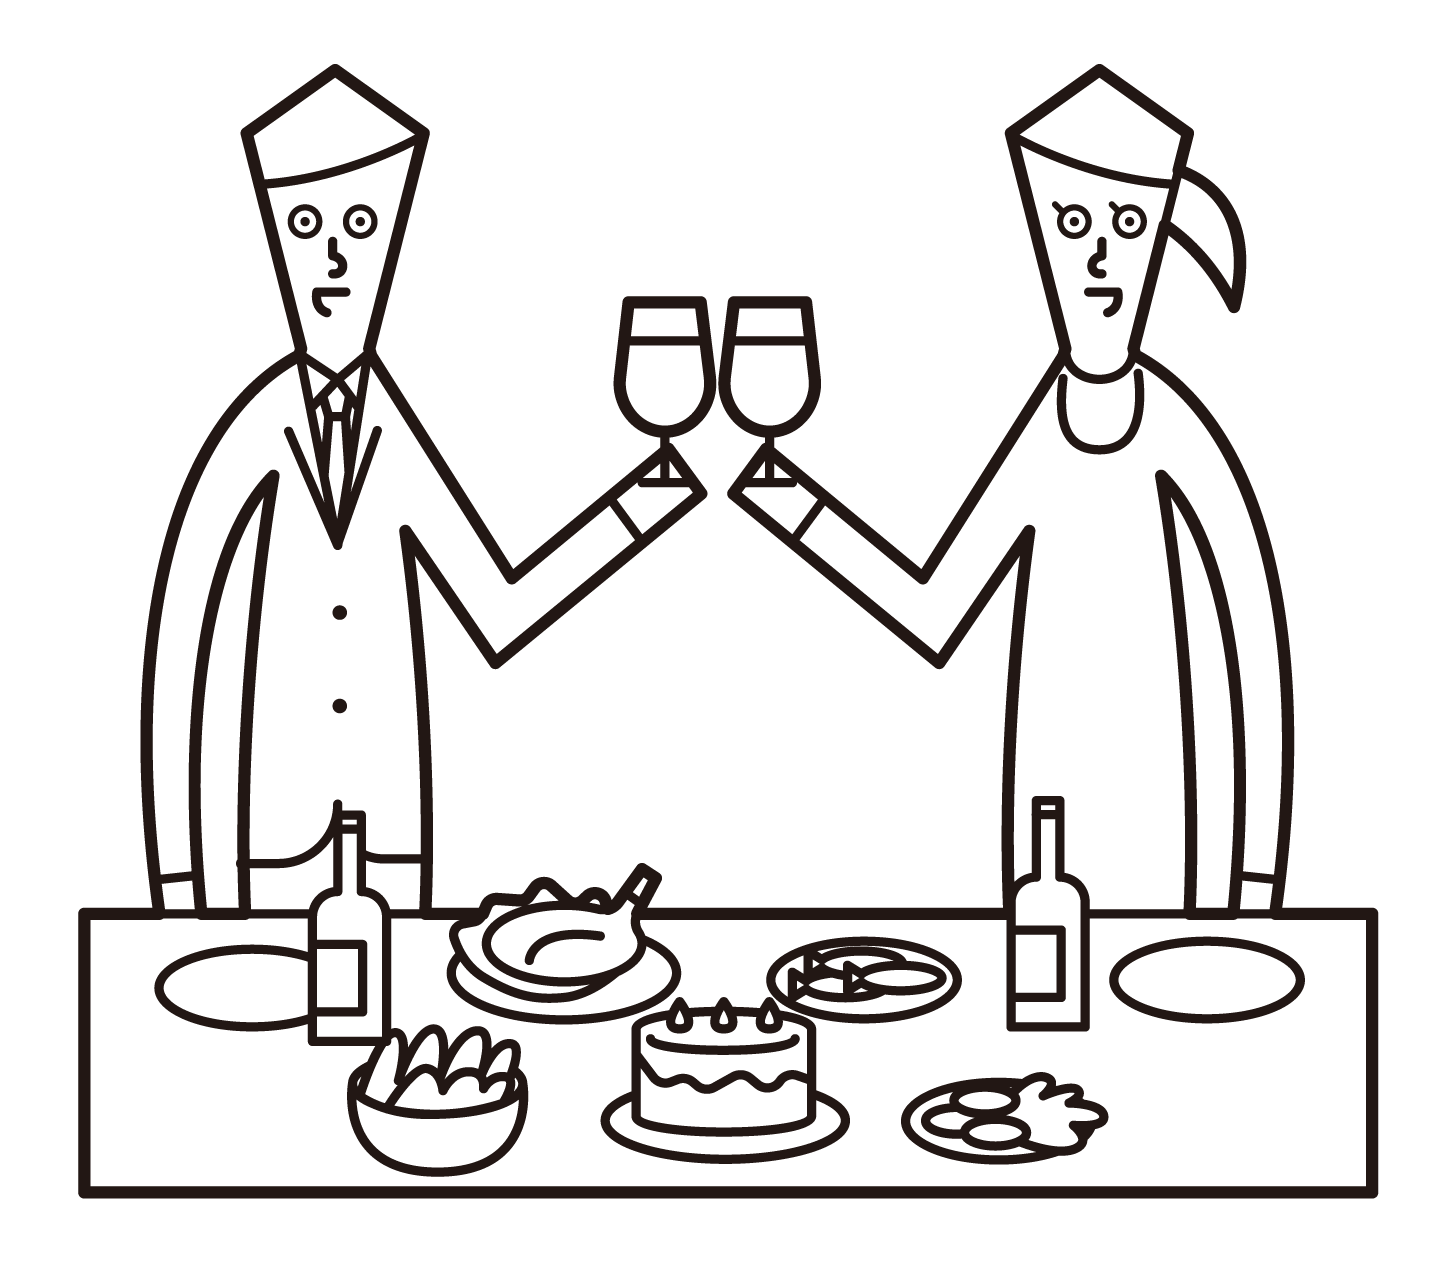 Illustrations of people (men and women) toasting at a party